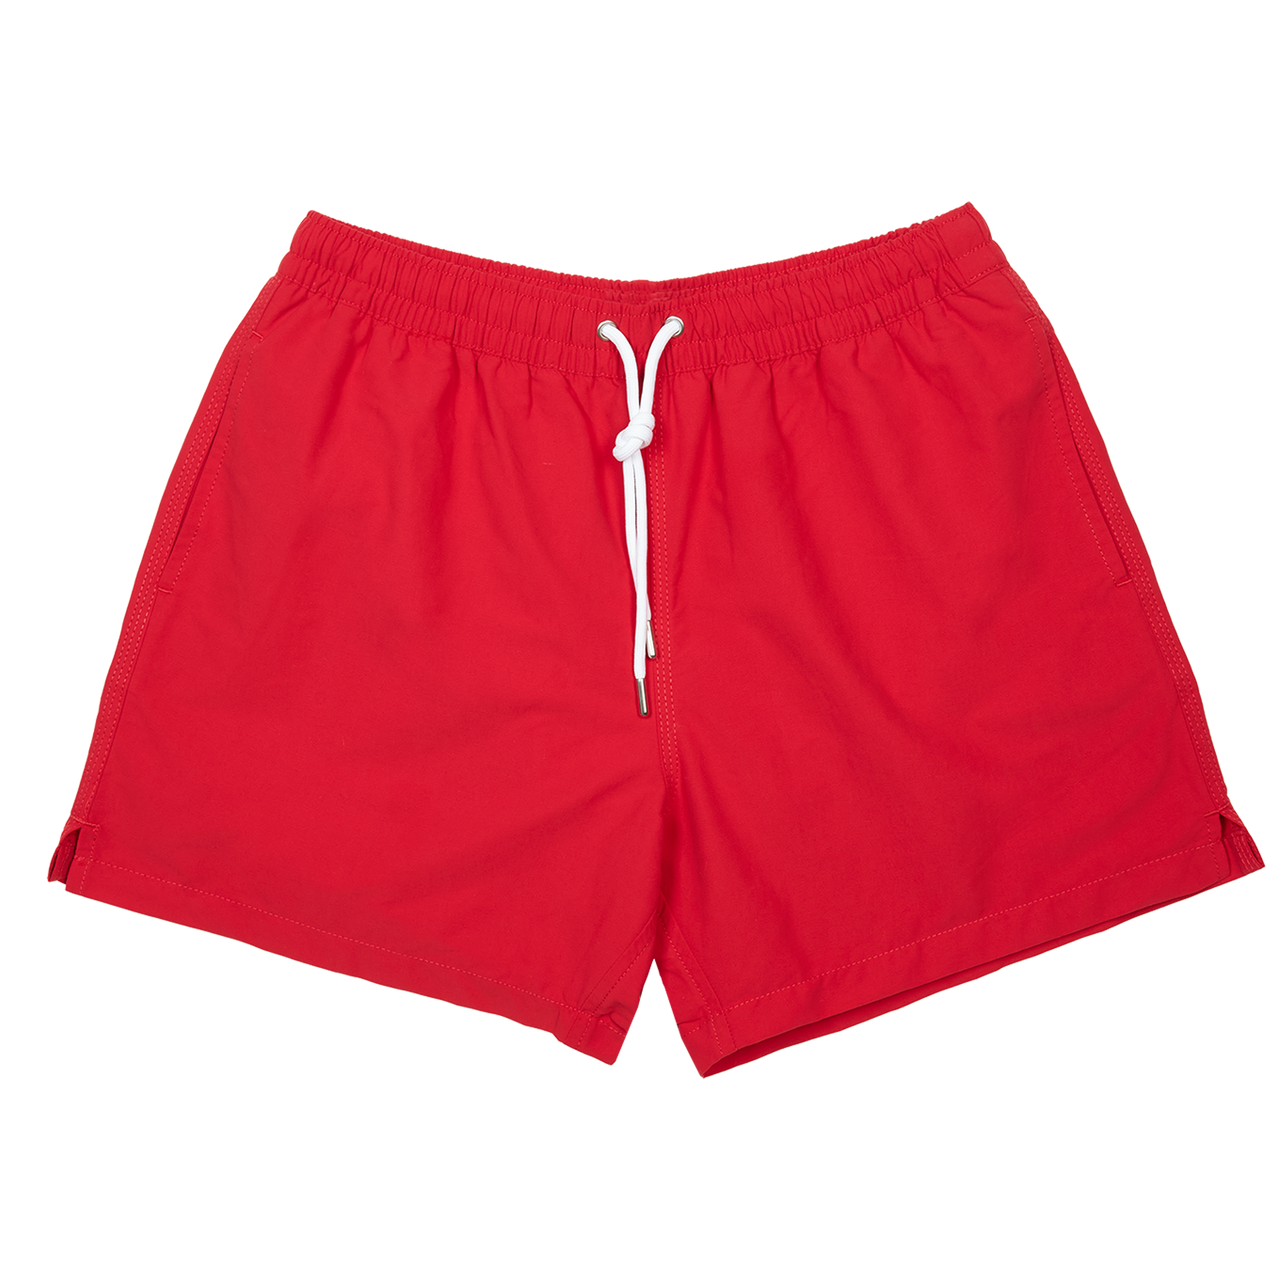 Drake's Swim Shorts in Solid Red